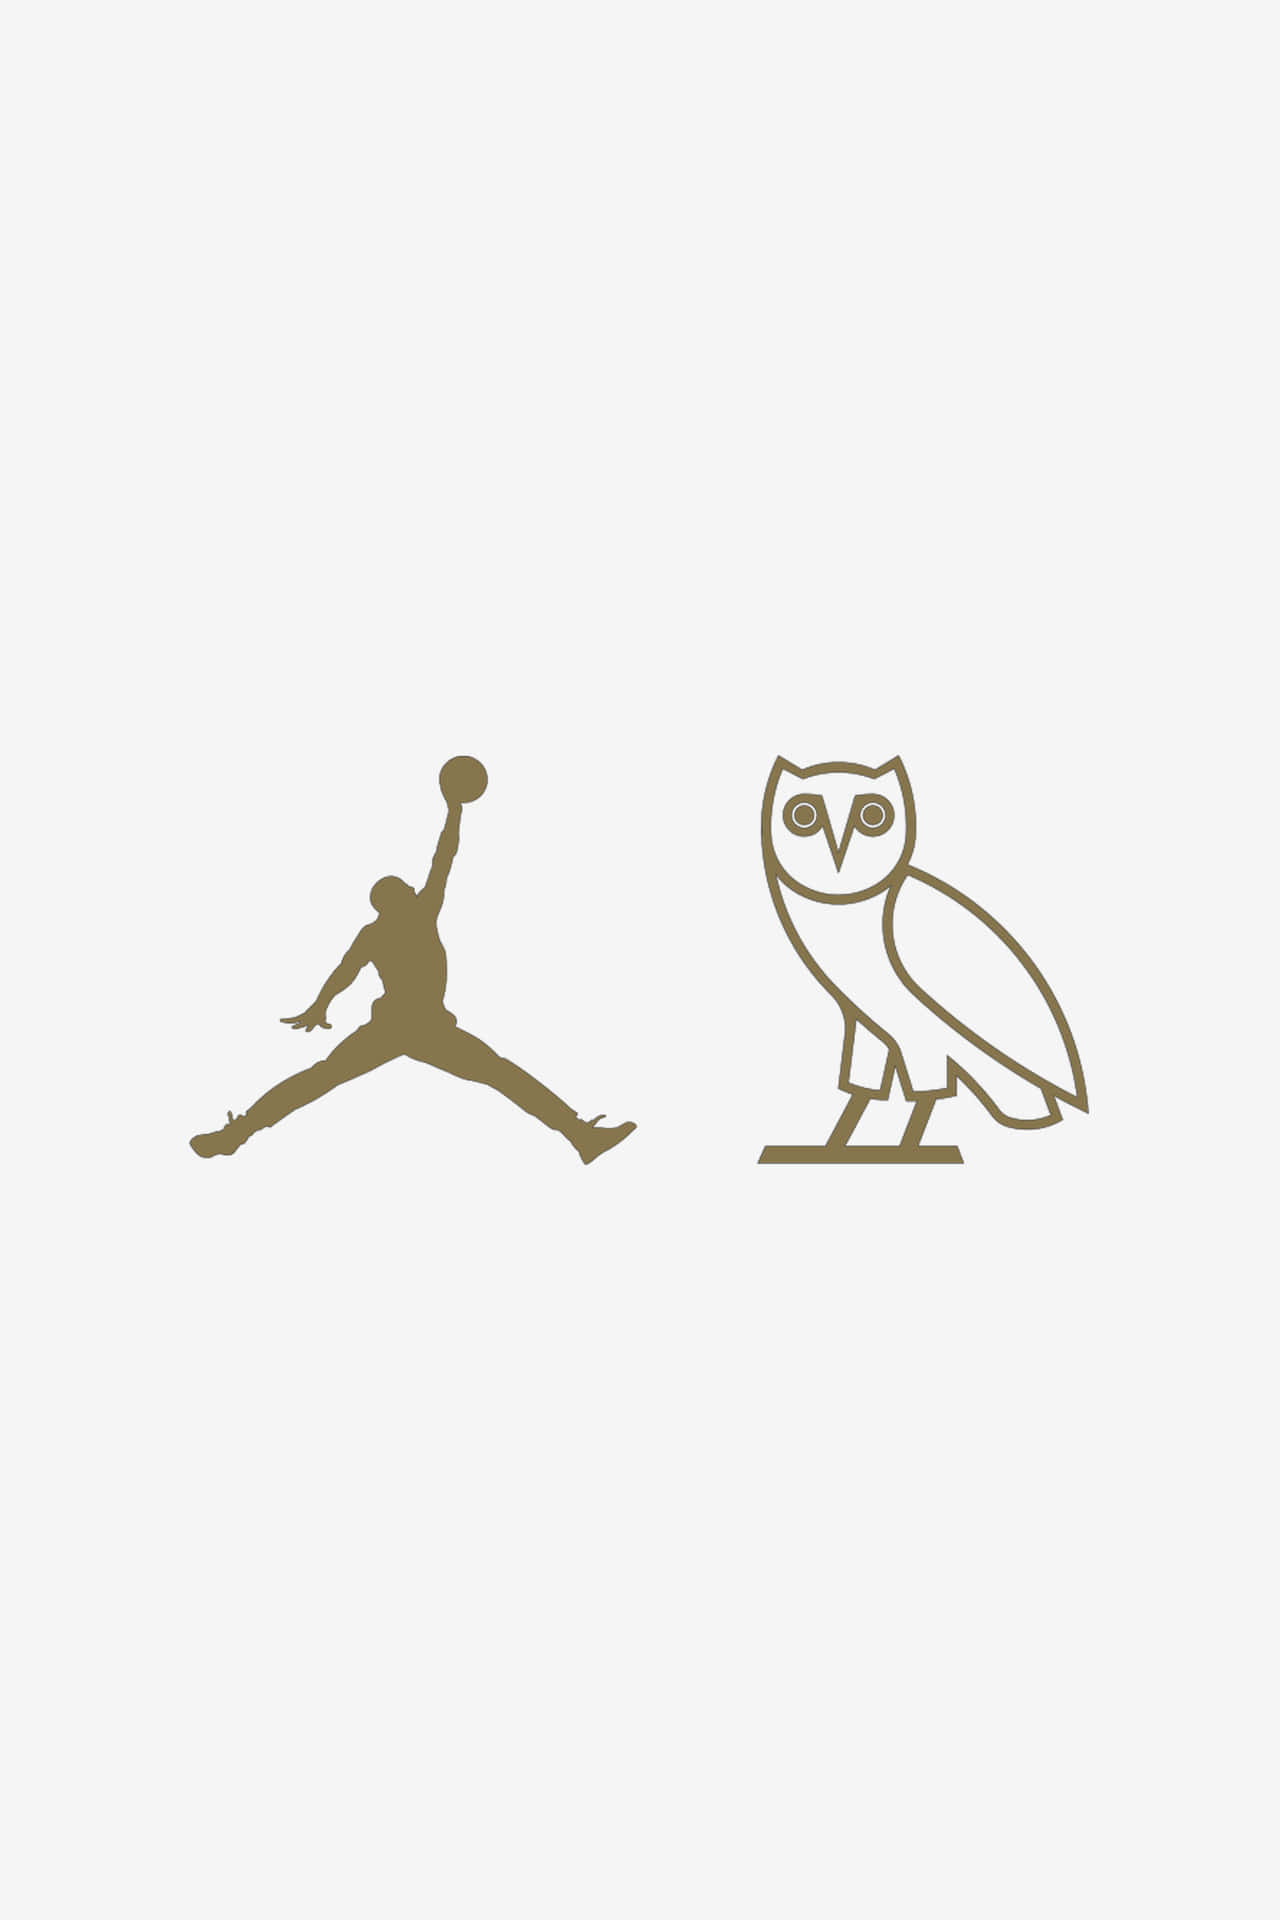 The Official Logo of Canadian Rapper Drake's Record Label Ovo Wallpaper